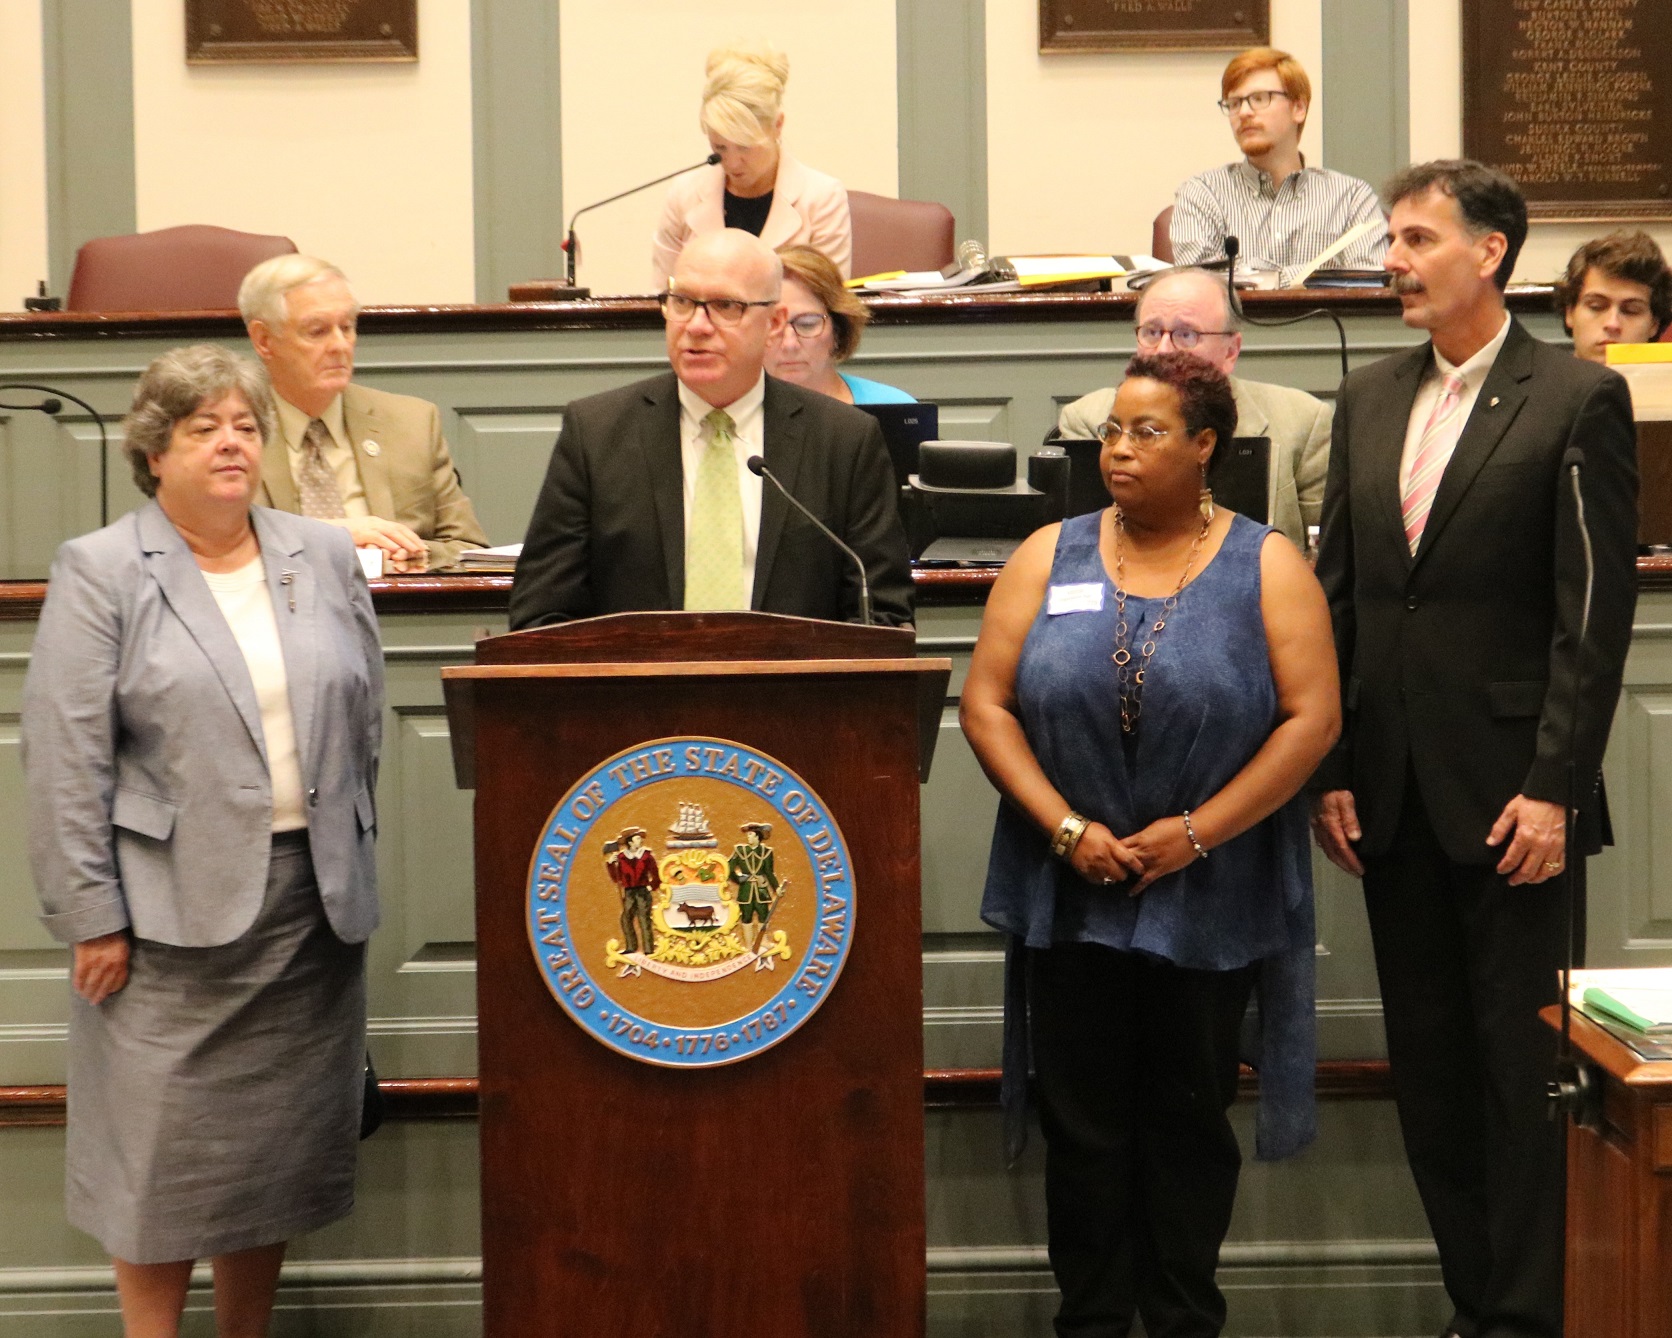 Division of Historical and Cultural Affairs Director Tim Slavin (at podium) speaking before the Delaware Senate passed Concurrent Resolution 76 recognizing the division for achieving accreditation by the American Alliance of Museums. From left foreground are division Deputy Director Suzanne Savery; Slavin; Gloria Henry, site supervisor of the John Dickinson Plantation; and Edward McWilliams, manager of the division’s Collections, Affiliates, Research and Exhibits Team.